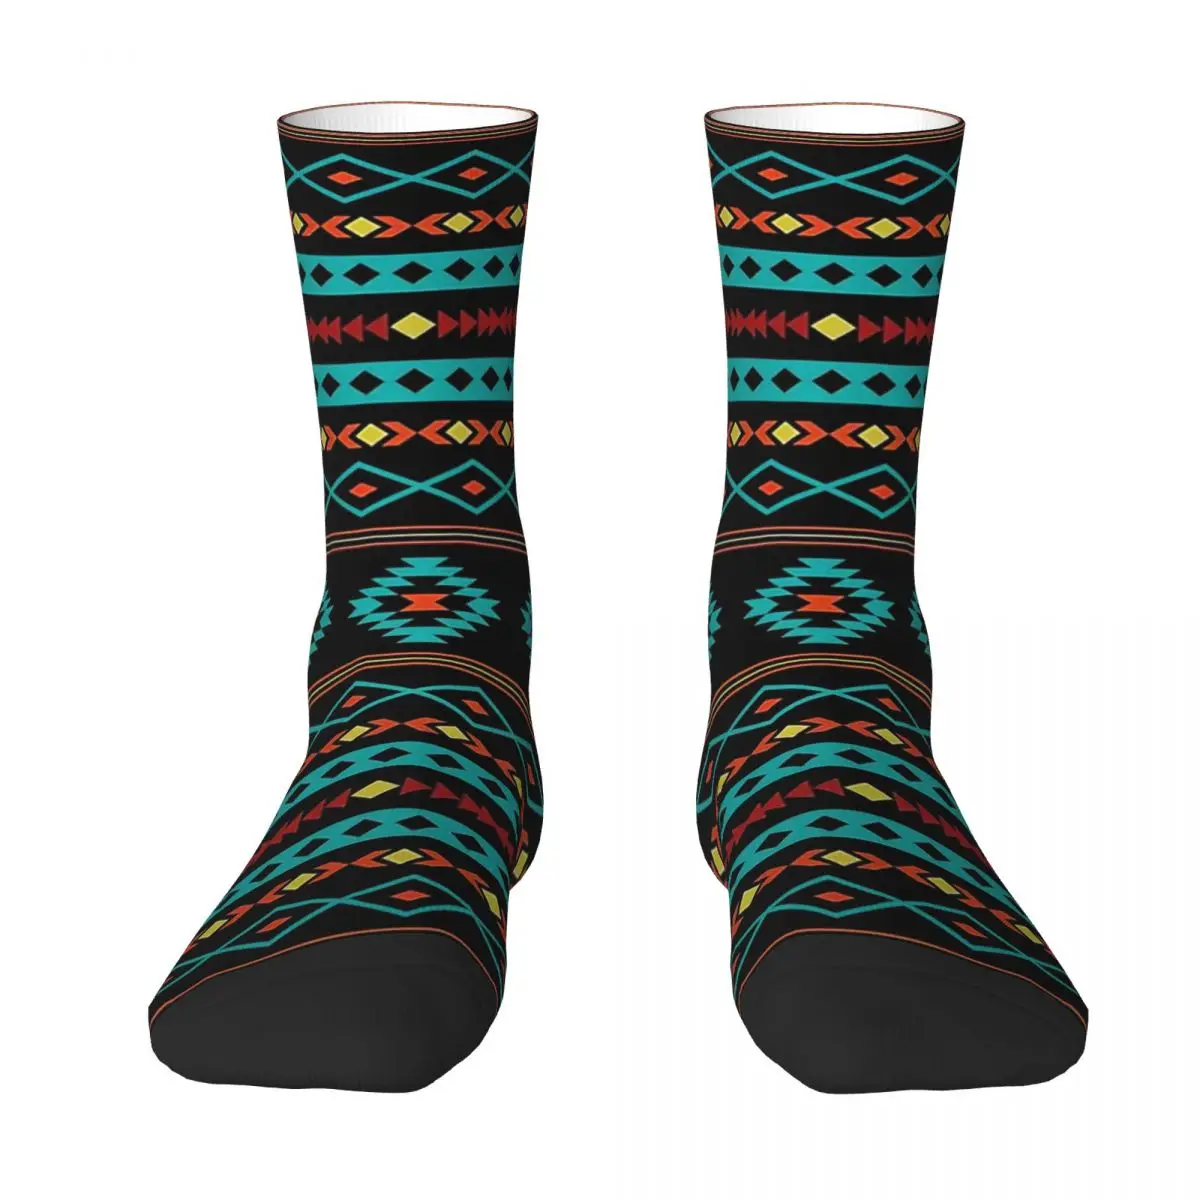 Aztec Teal Reds Yellow Black Mixed Motifs Pattern Adult Socks Unisex socks,men Socks women Socks black red mixed leather customized letters collar choker necklace men women sexy chocker role age play ddlg cosplay jewelry